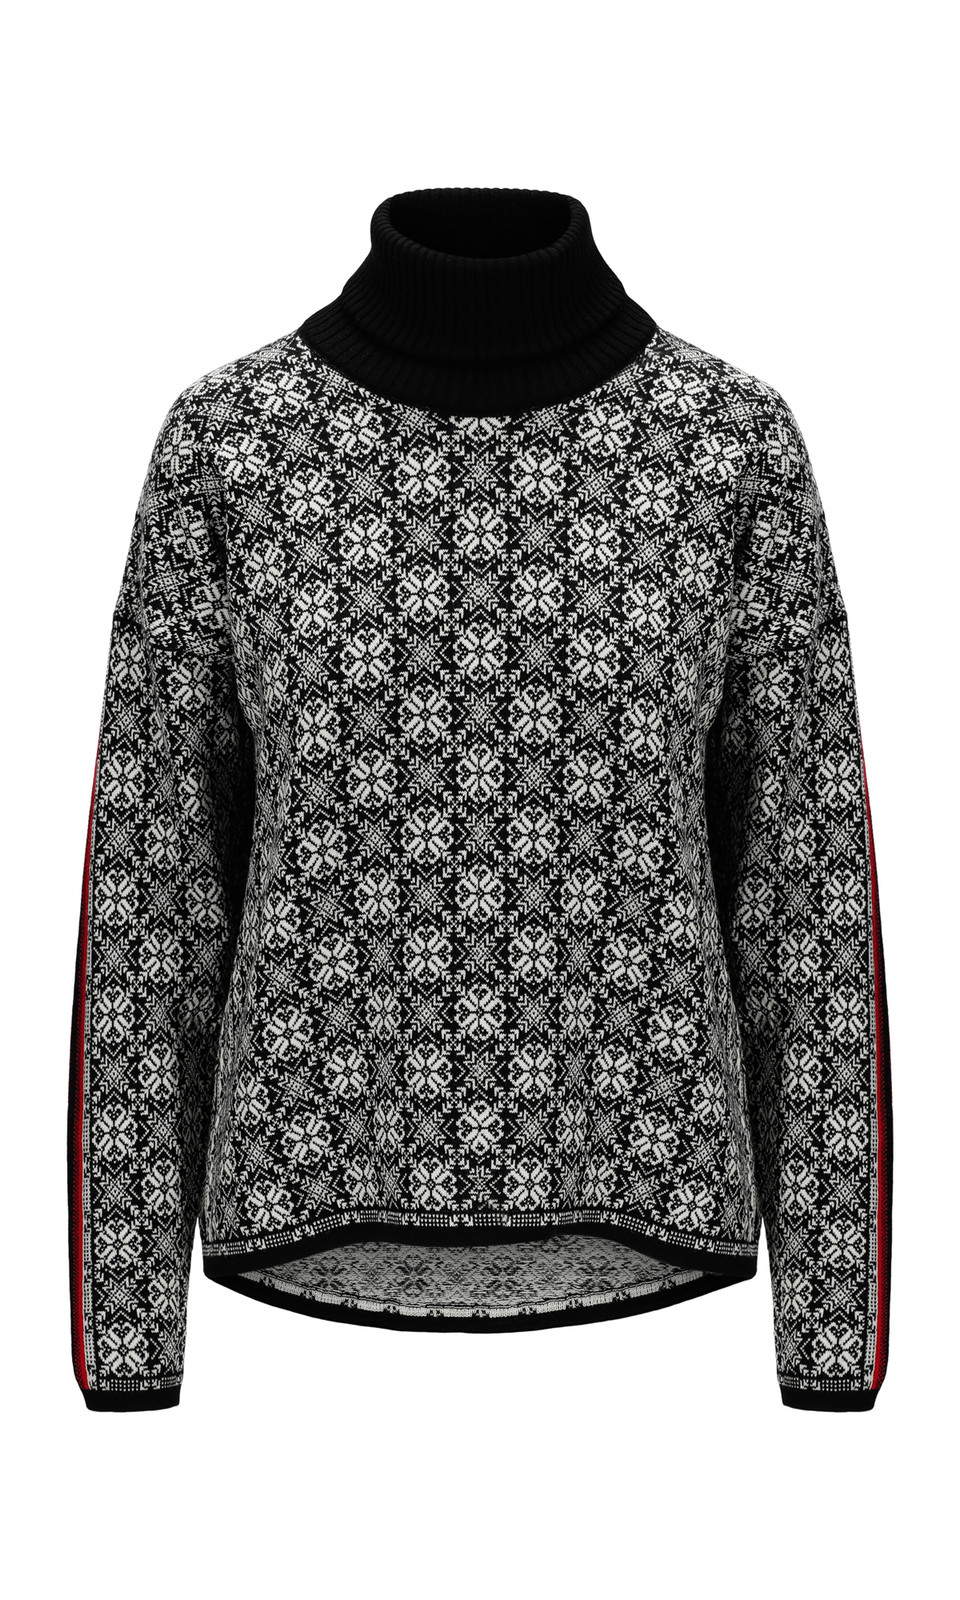 Dale of Norway Frida Women's Sweater F - Black/Offwhite, 94541F